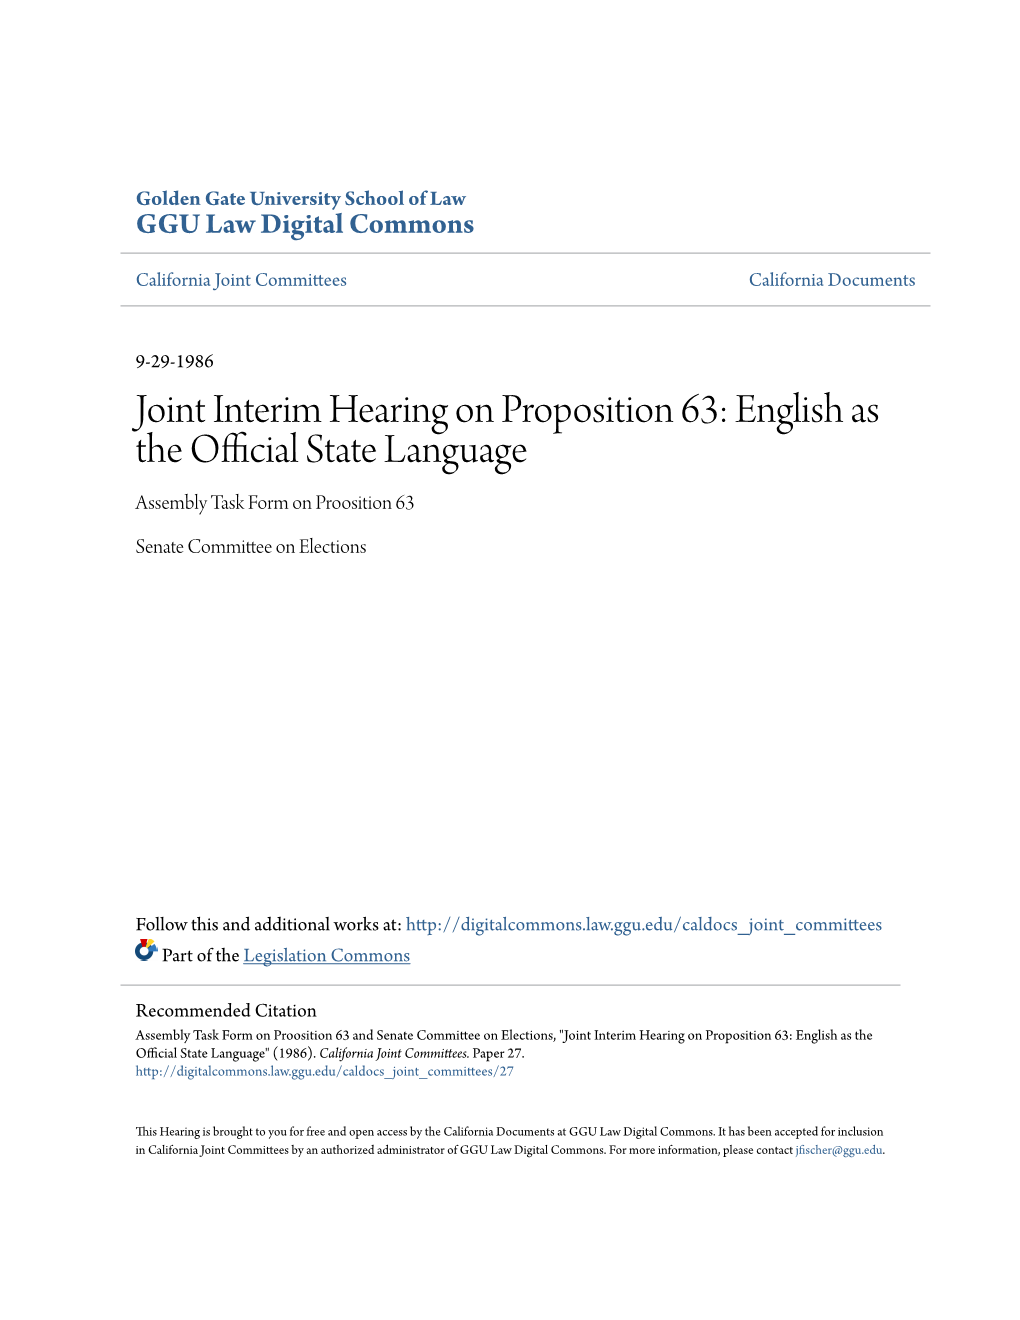 Joint Interim Hearing on Proposition 63: English As the Official State Language Assembly Task Form on Proosition 63